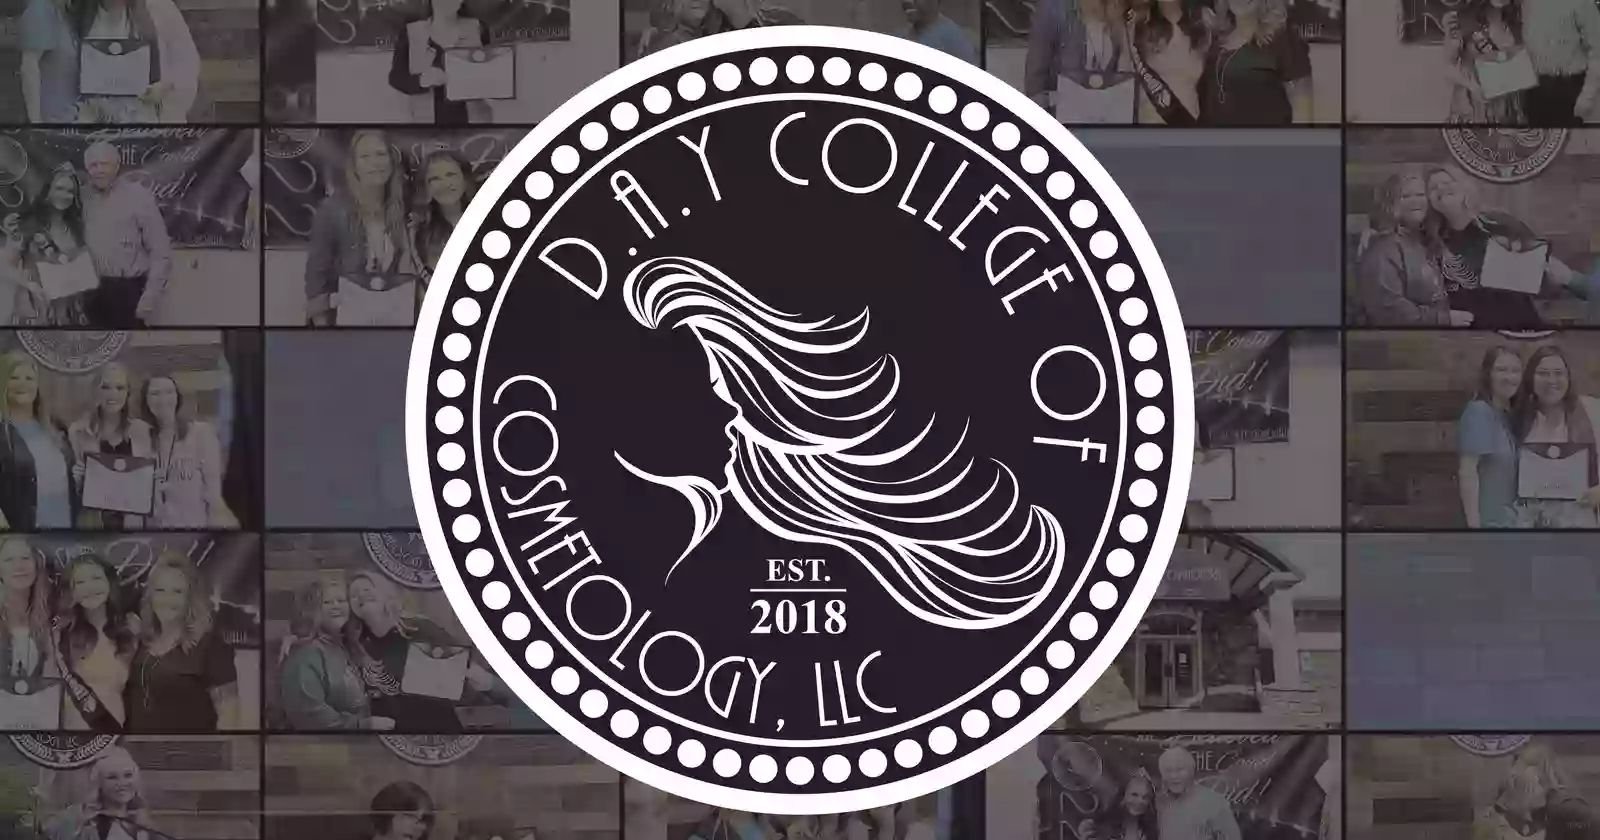 D.A.Y College Of Cosmetology